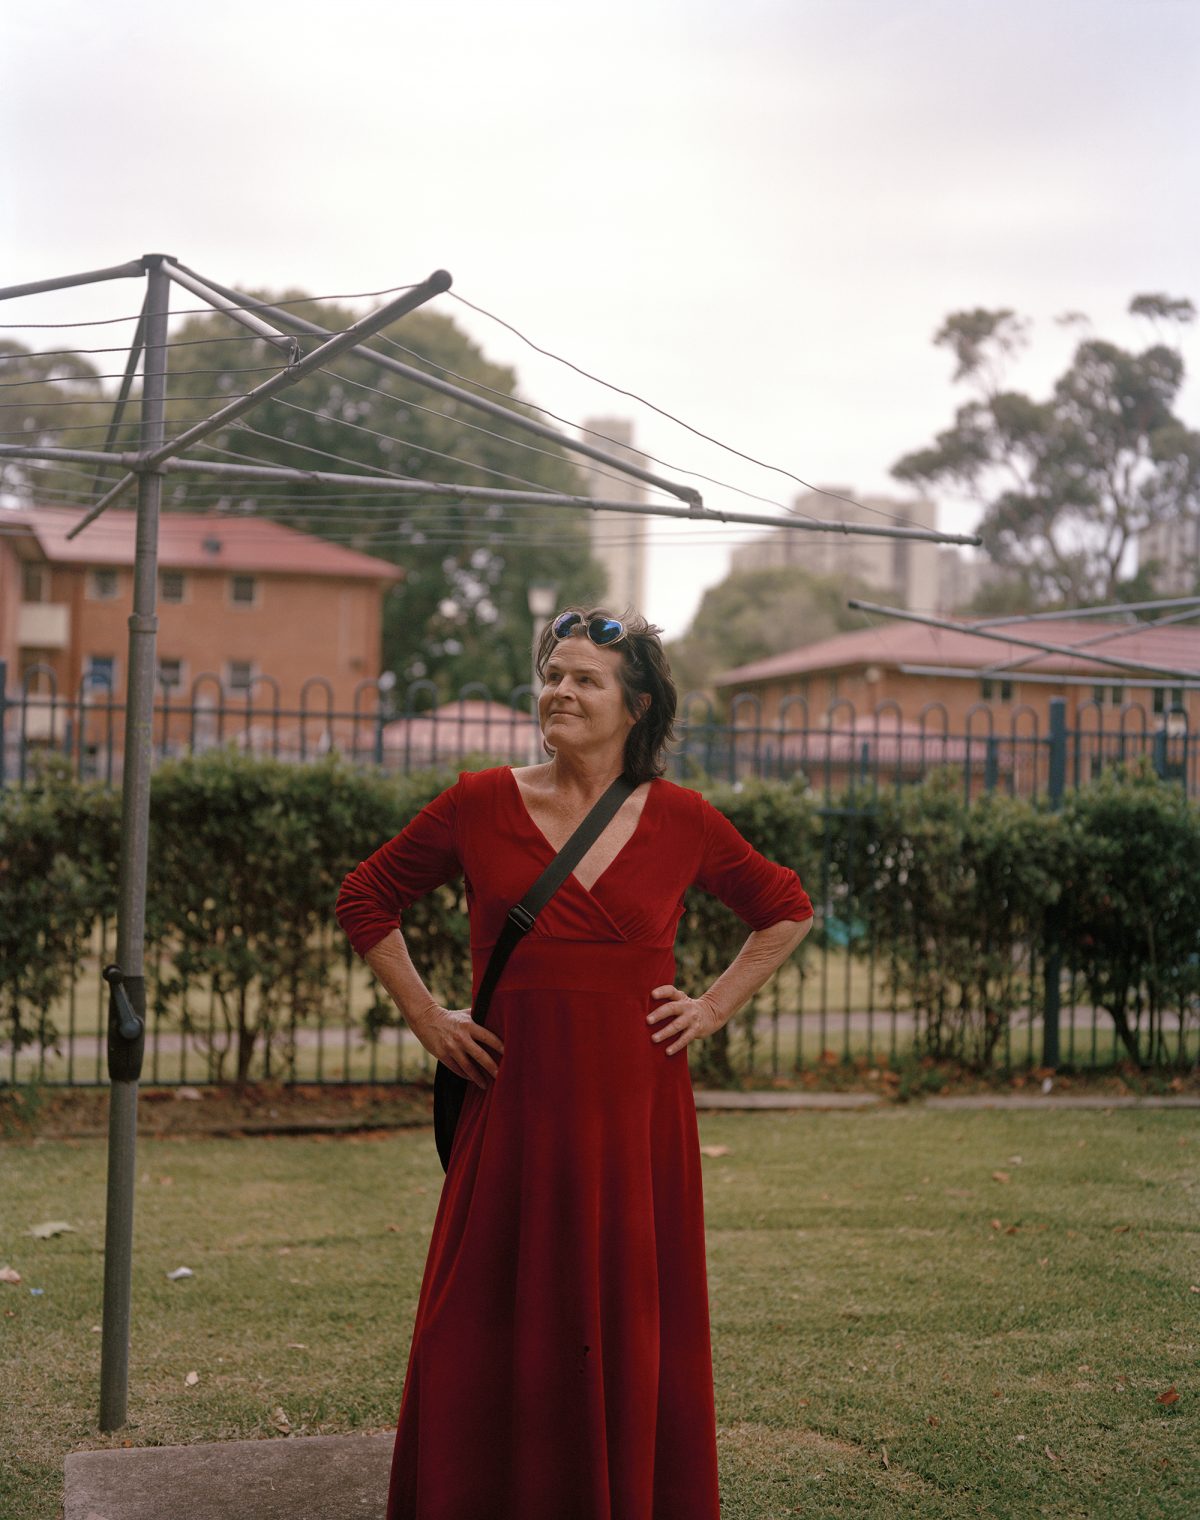 Norrie standing in a red dress near a hills hoist clothesline.